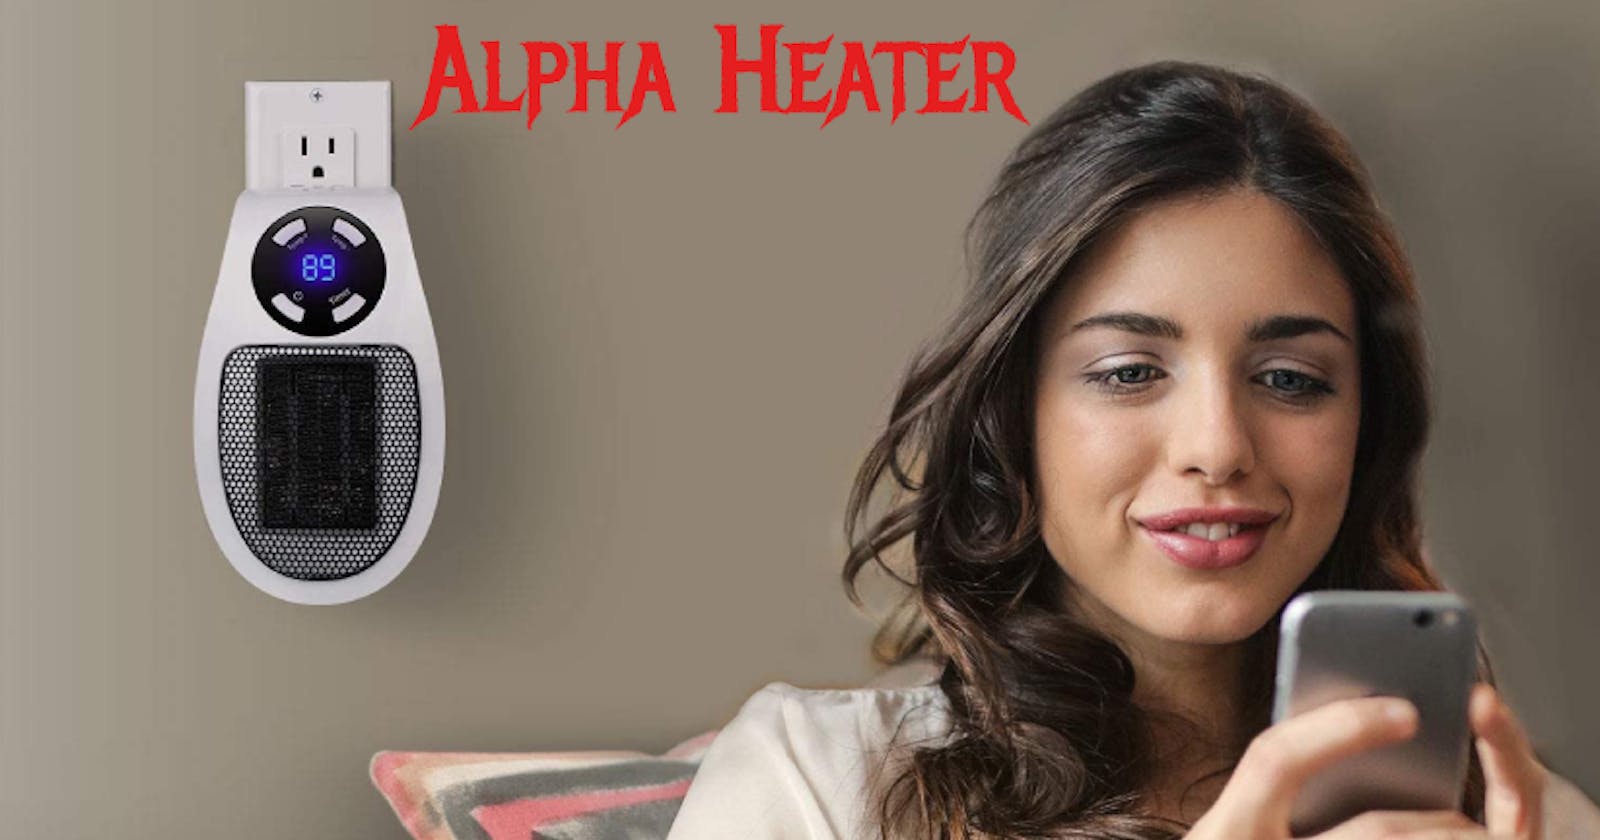 Alpha Heater - Price, Reviews, Uses, Complaints & Warnings?